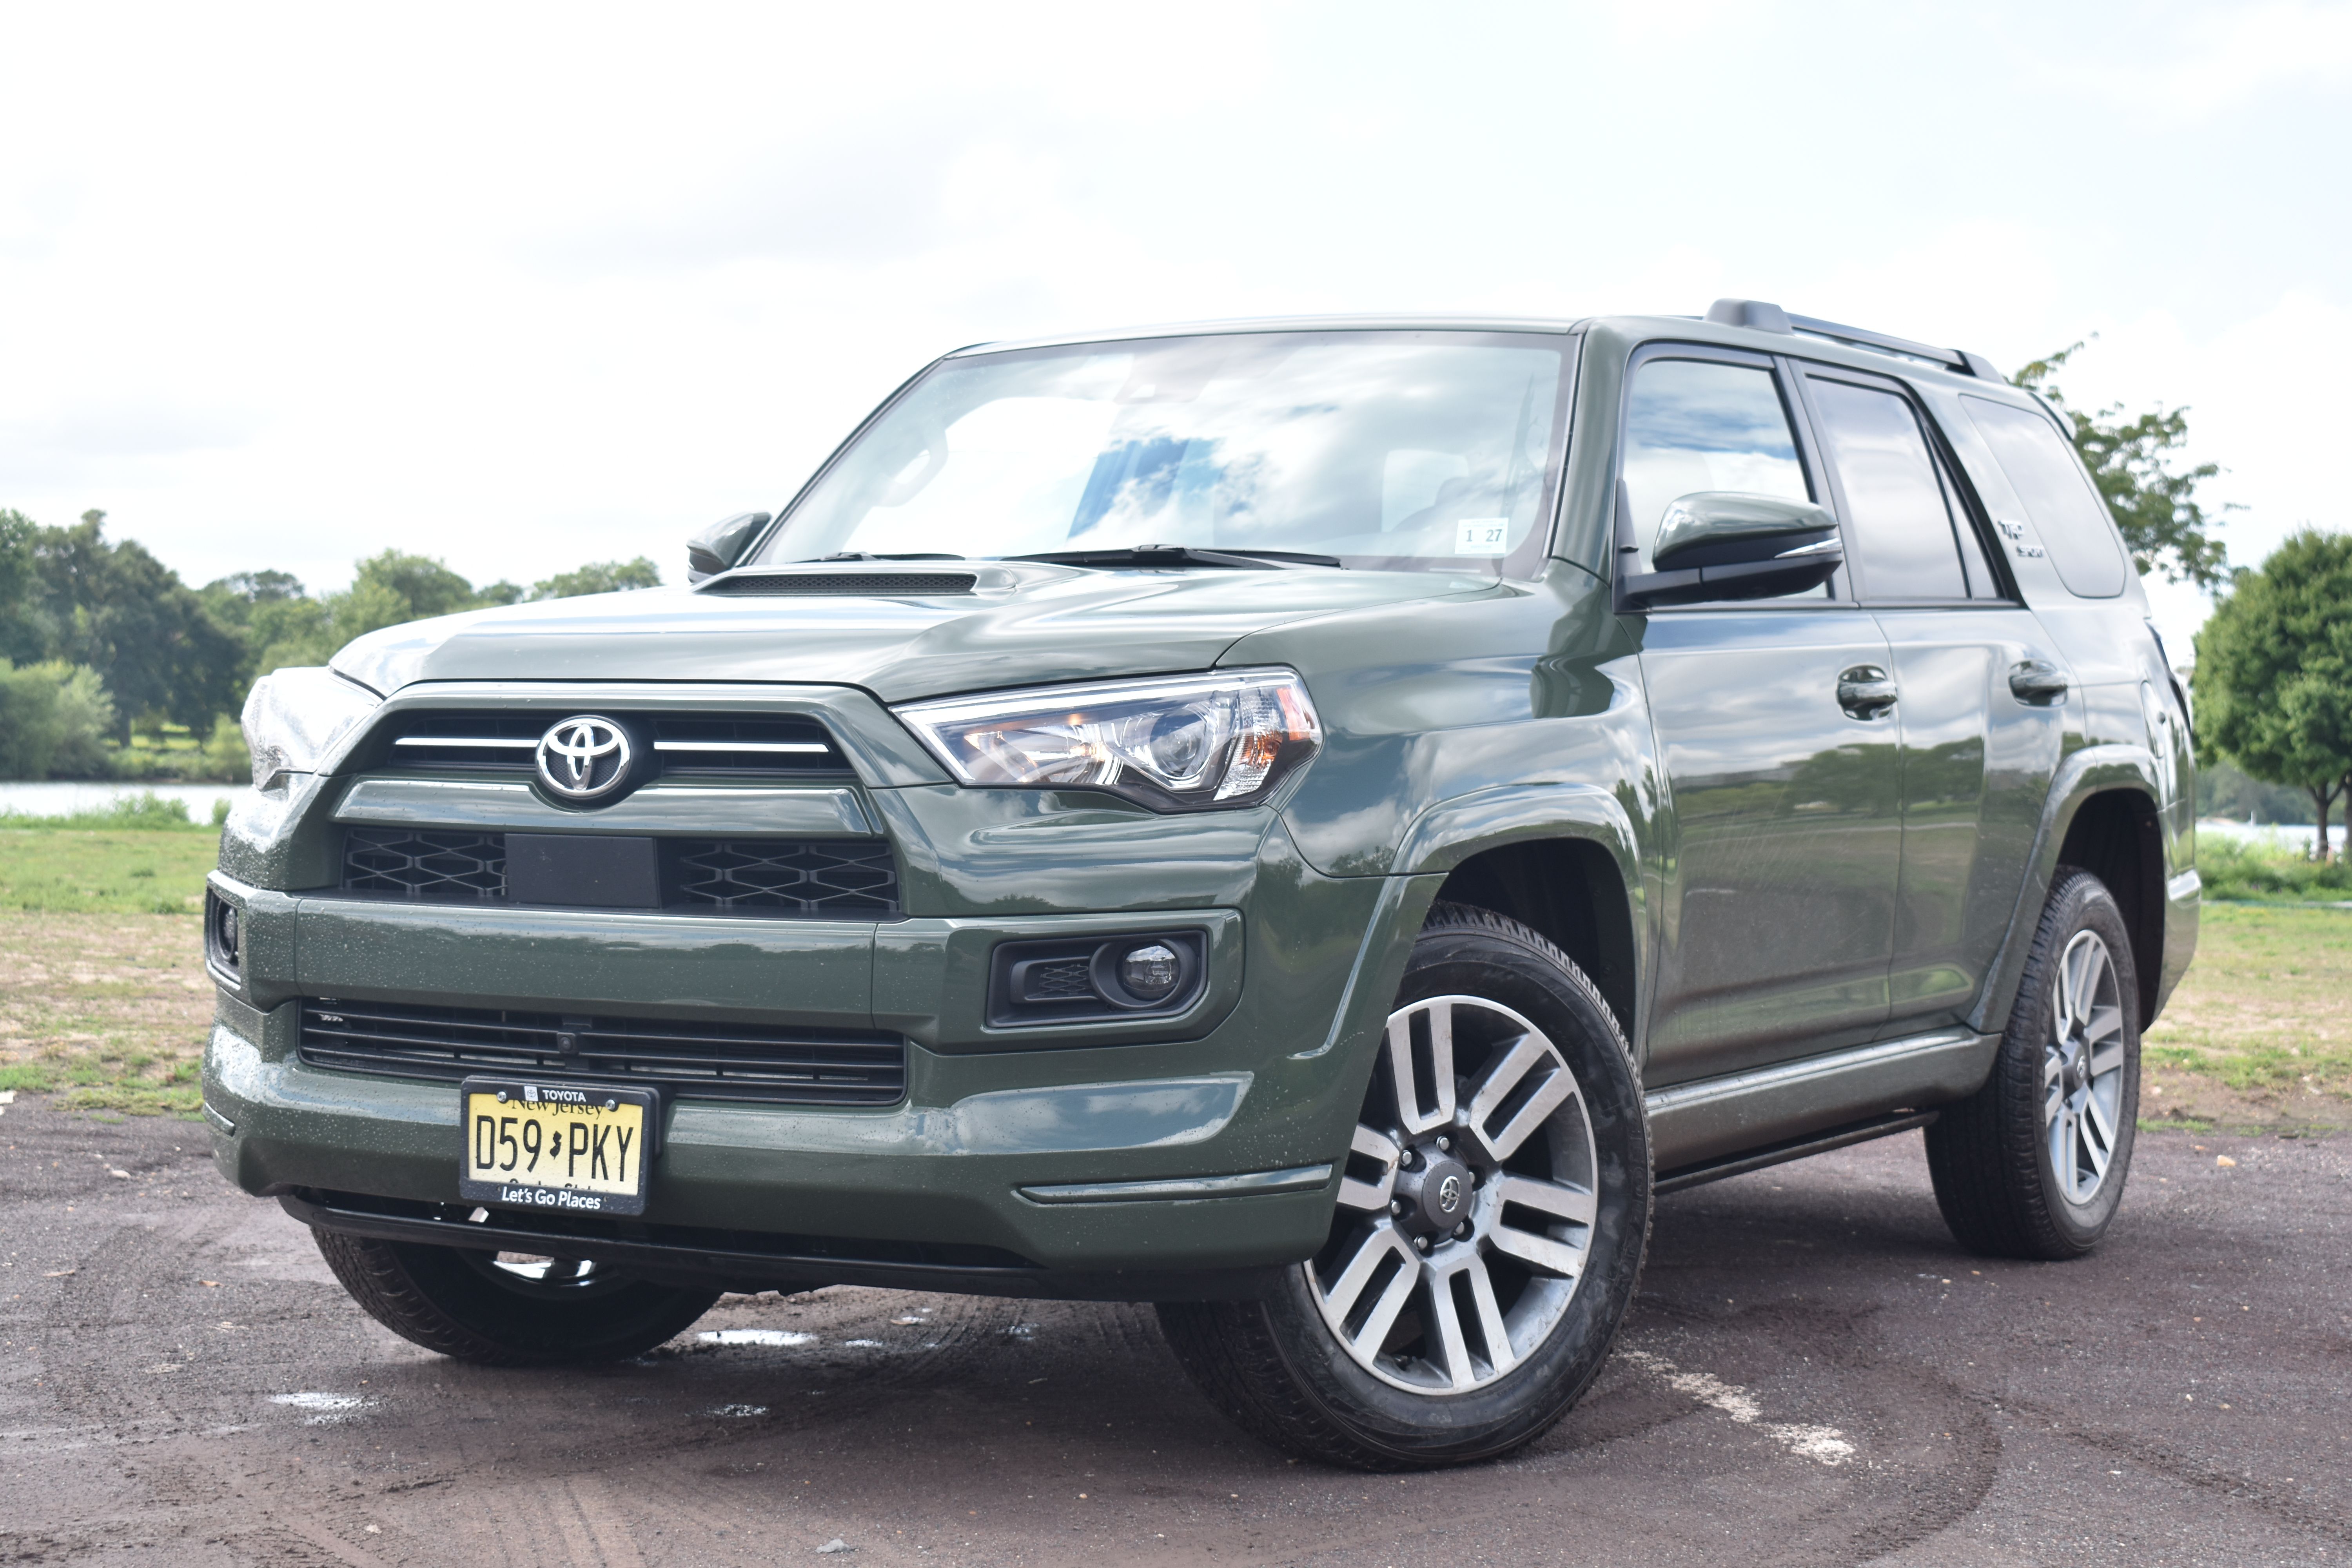 2022 Toyota 4Runner TRD Sport Review: A Big SUV For The Family